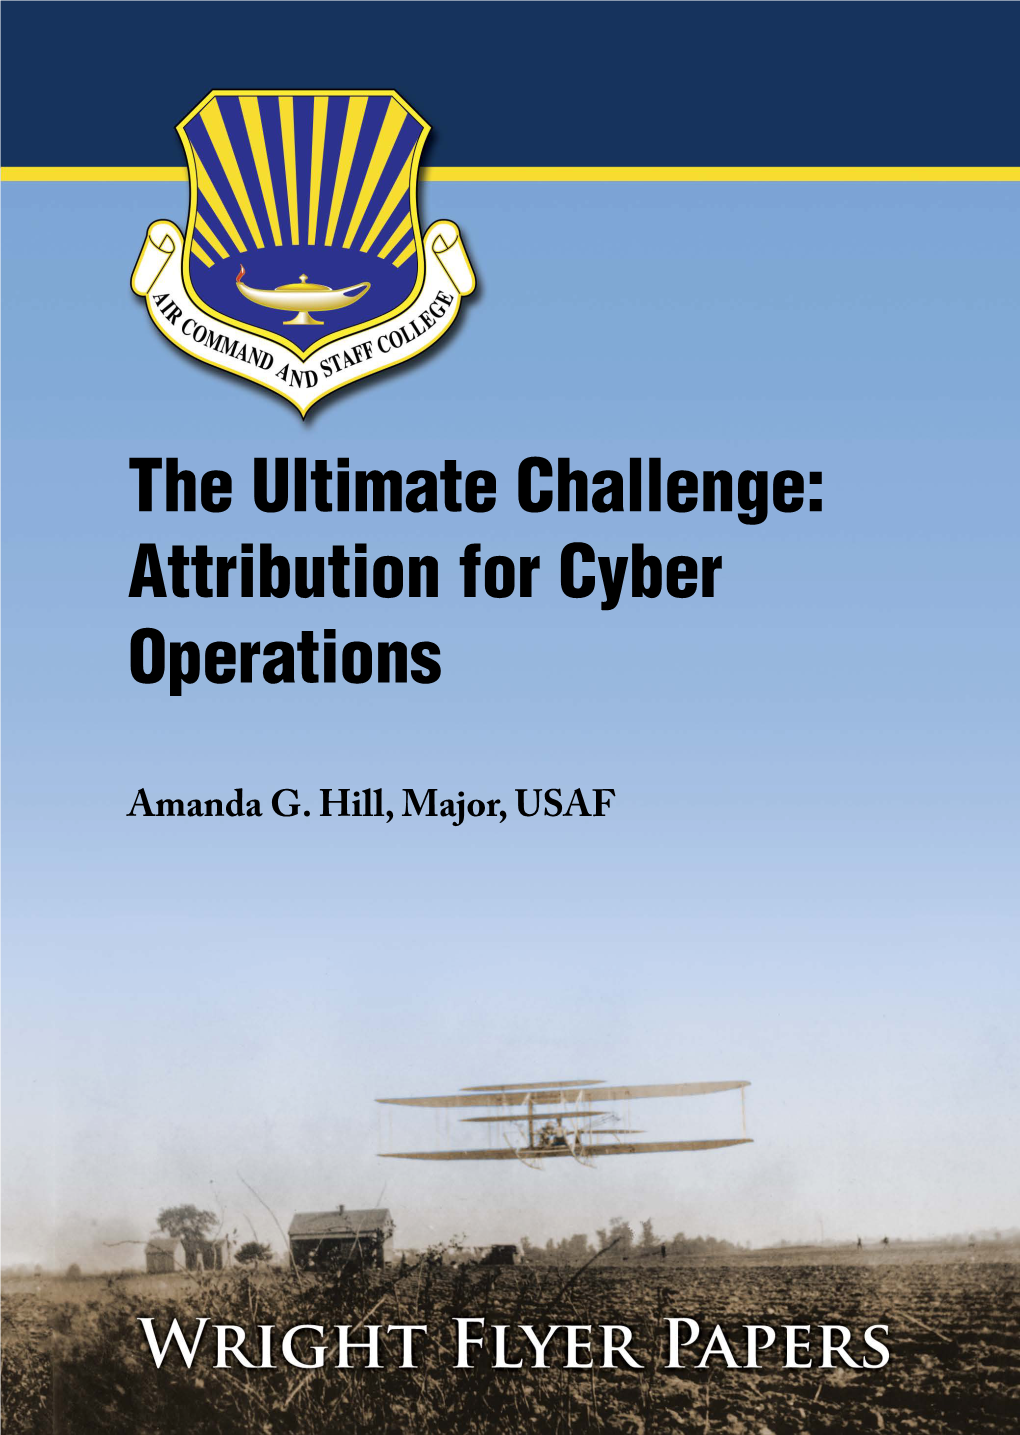 Attribution for Cyber Operations